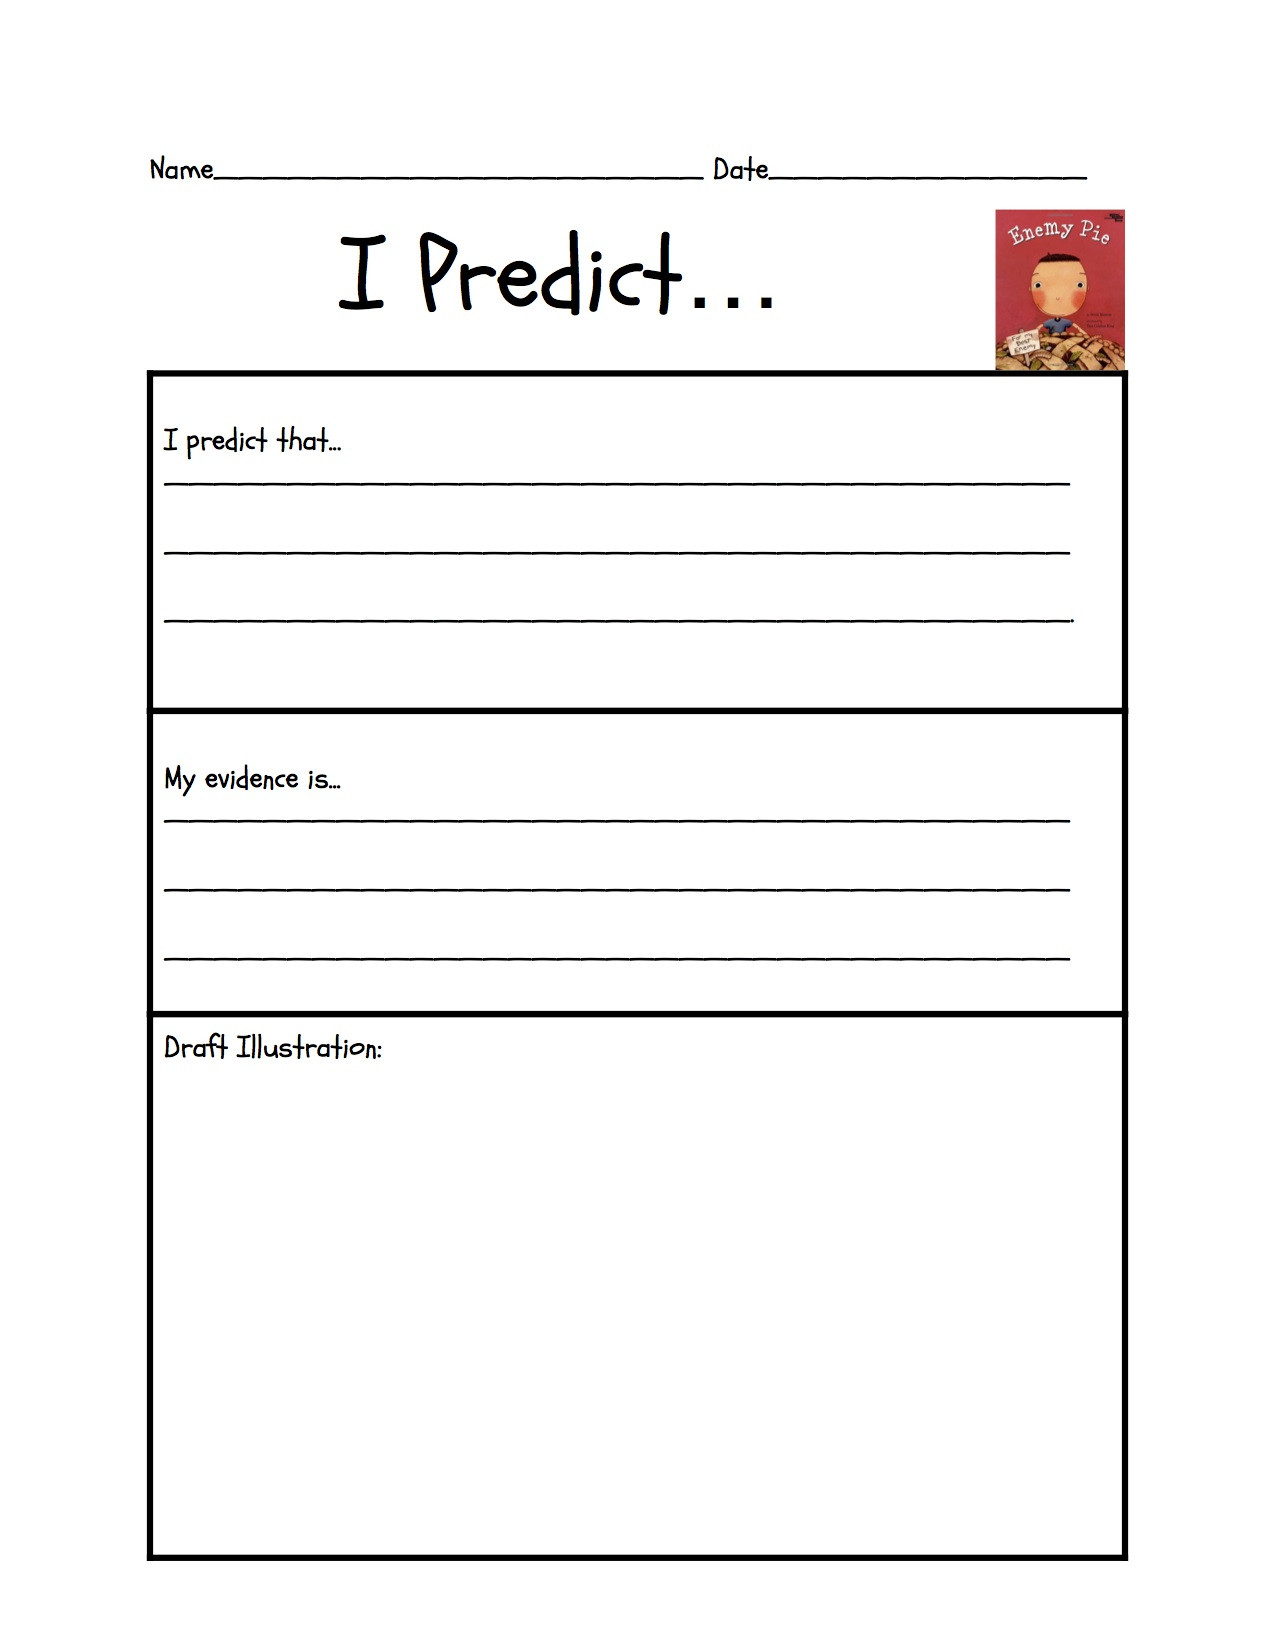 Prediction Worksheets for 2nd Grade Predicting “enemy Pie”